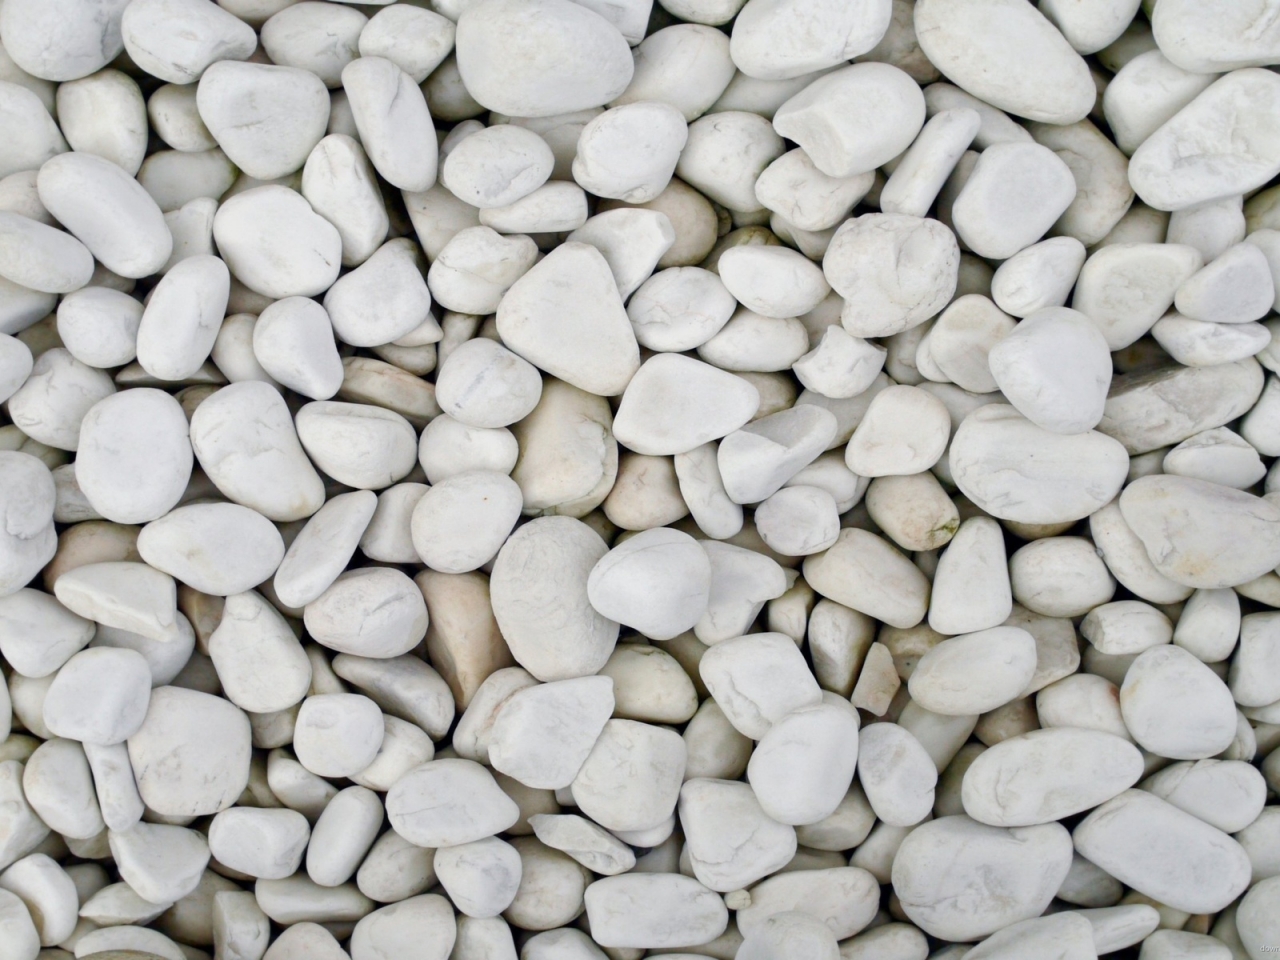 White Pebbles for 1280 x 960 resolution